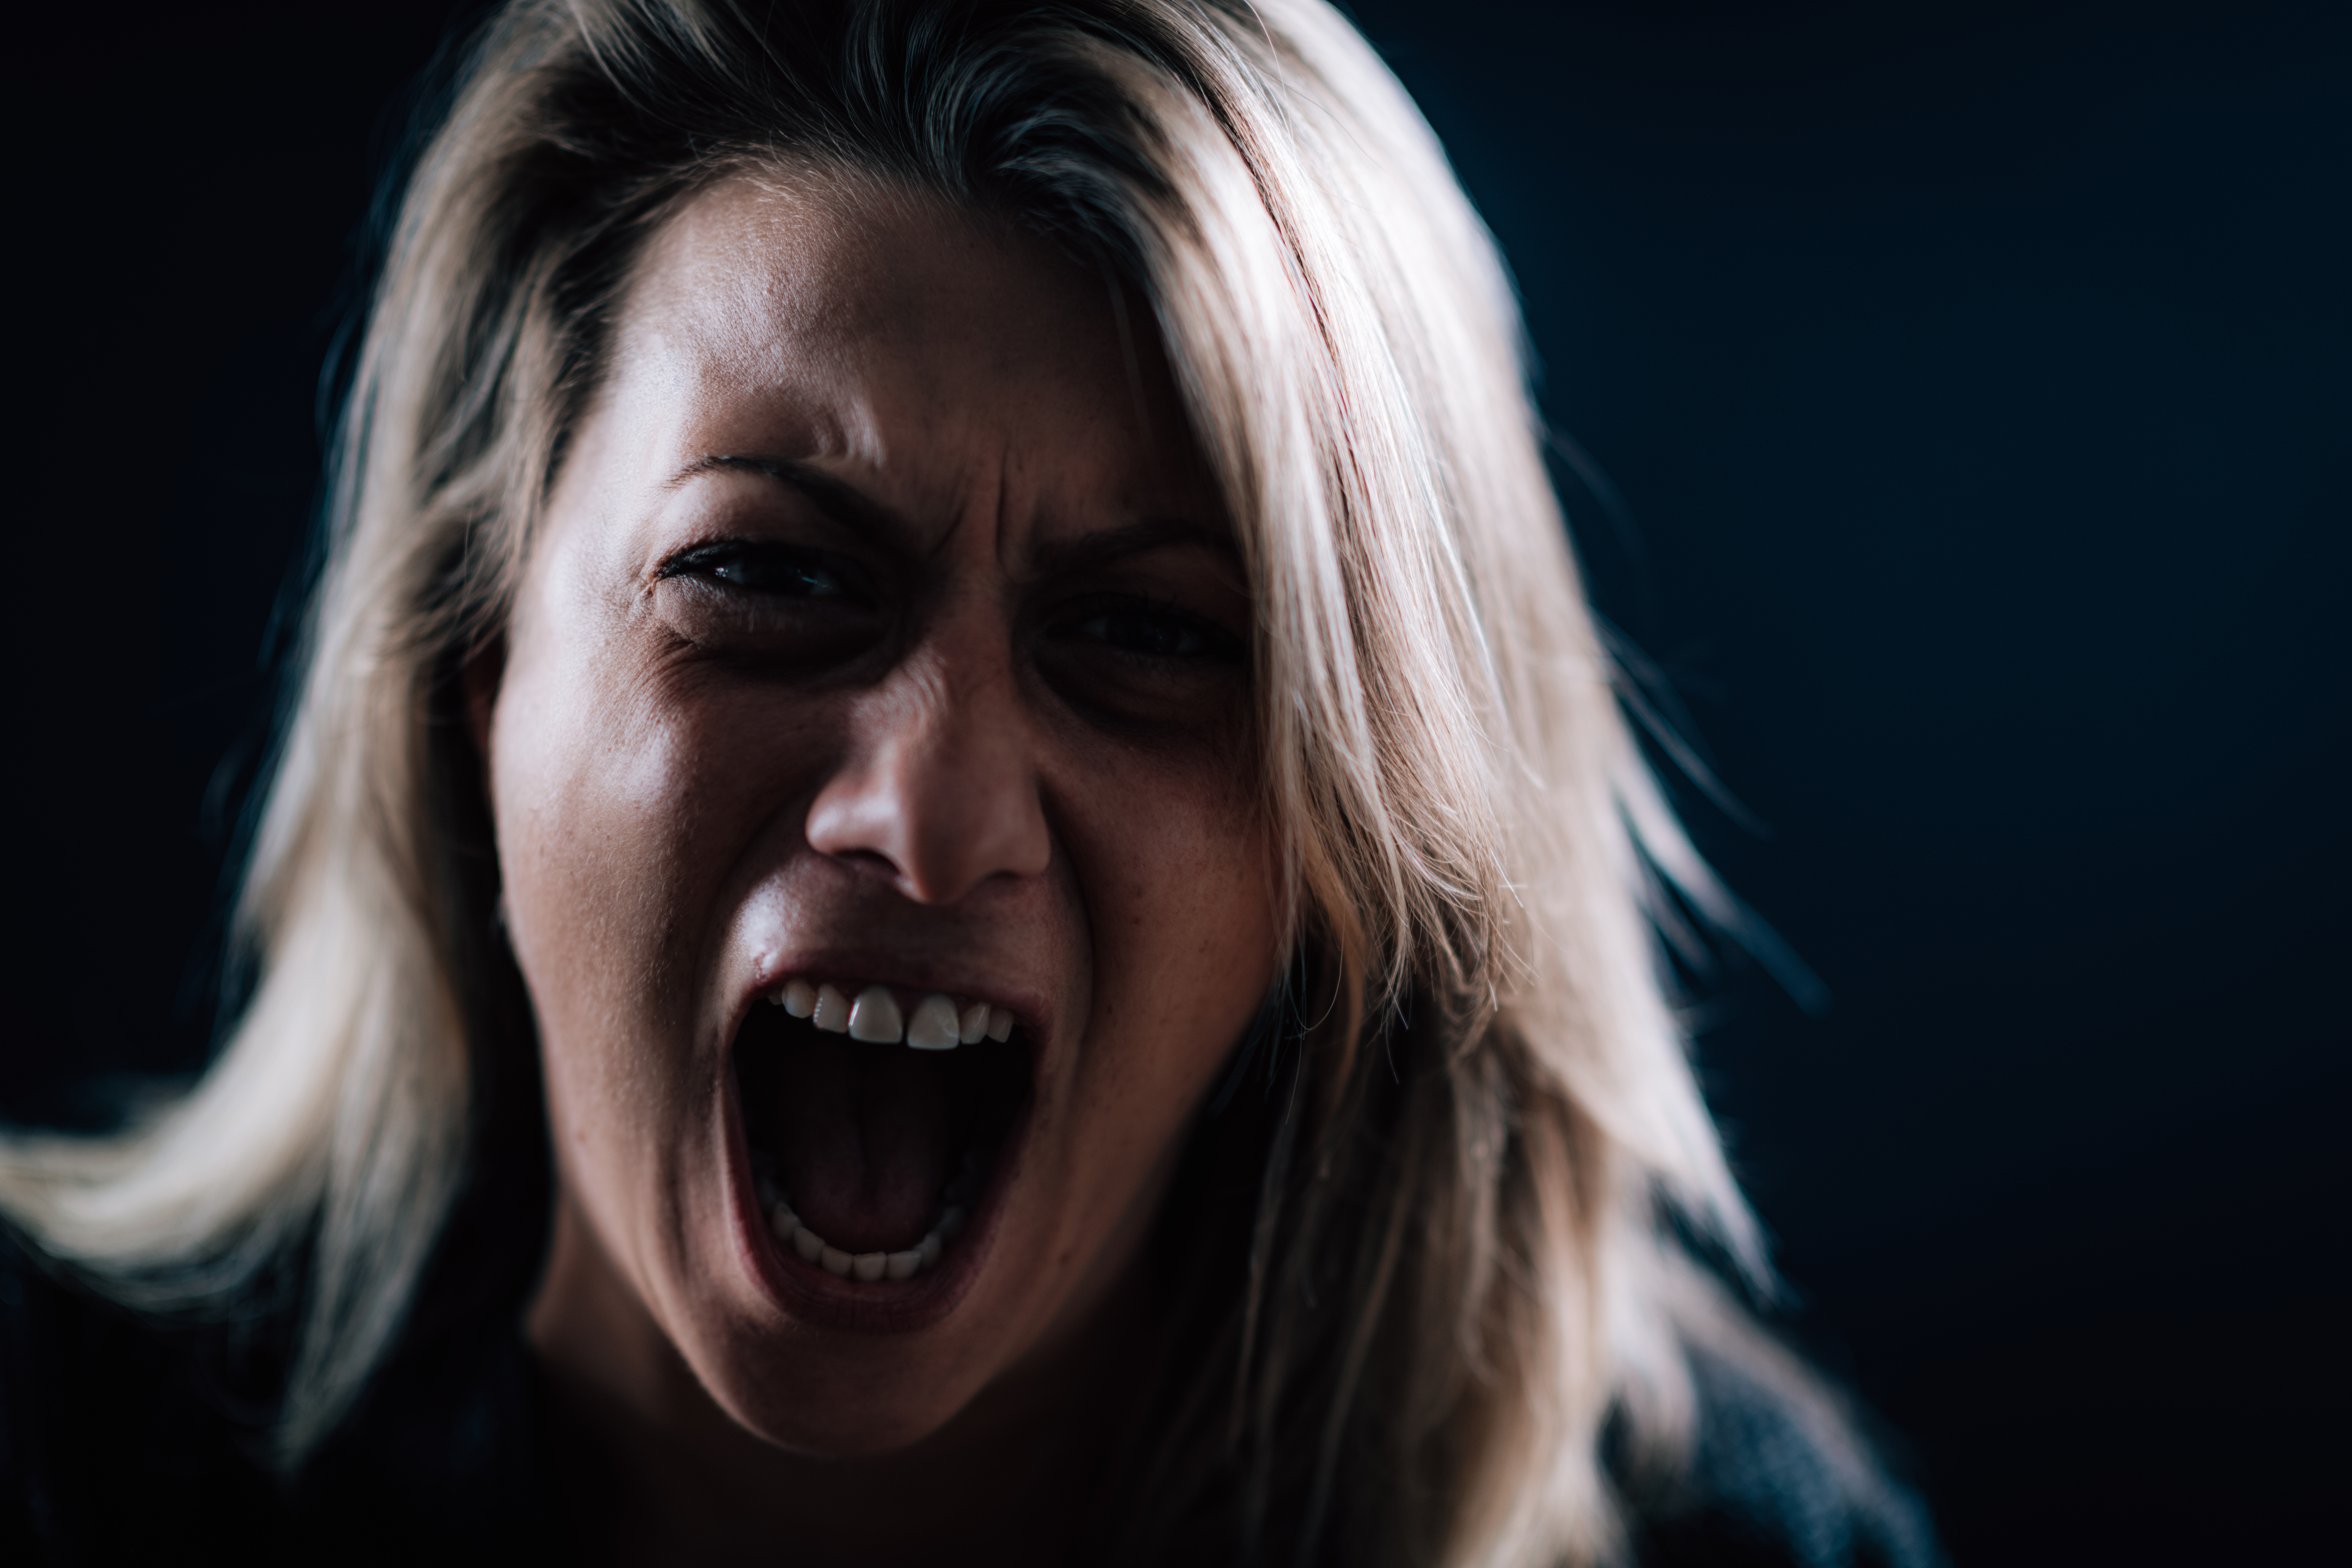 Anger – Intense Portrait of an Angry Woman